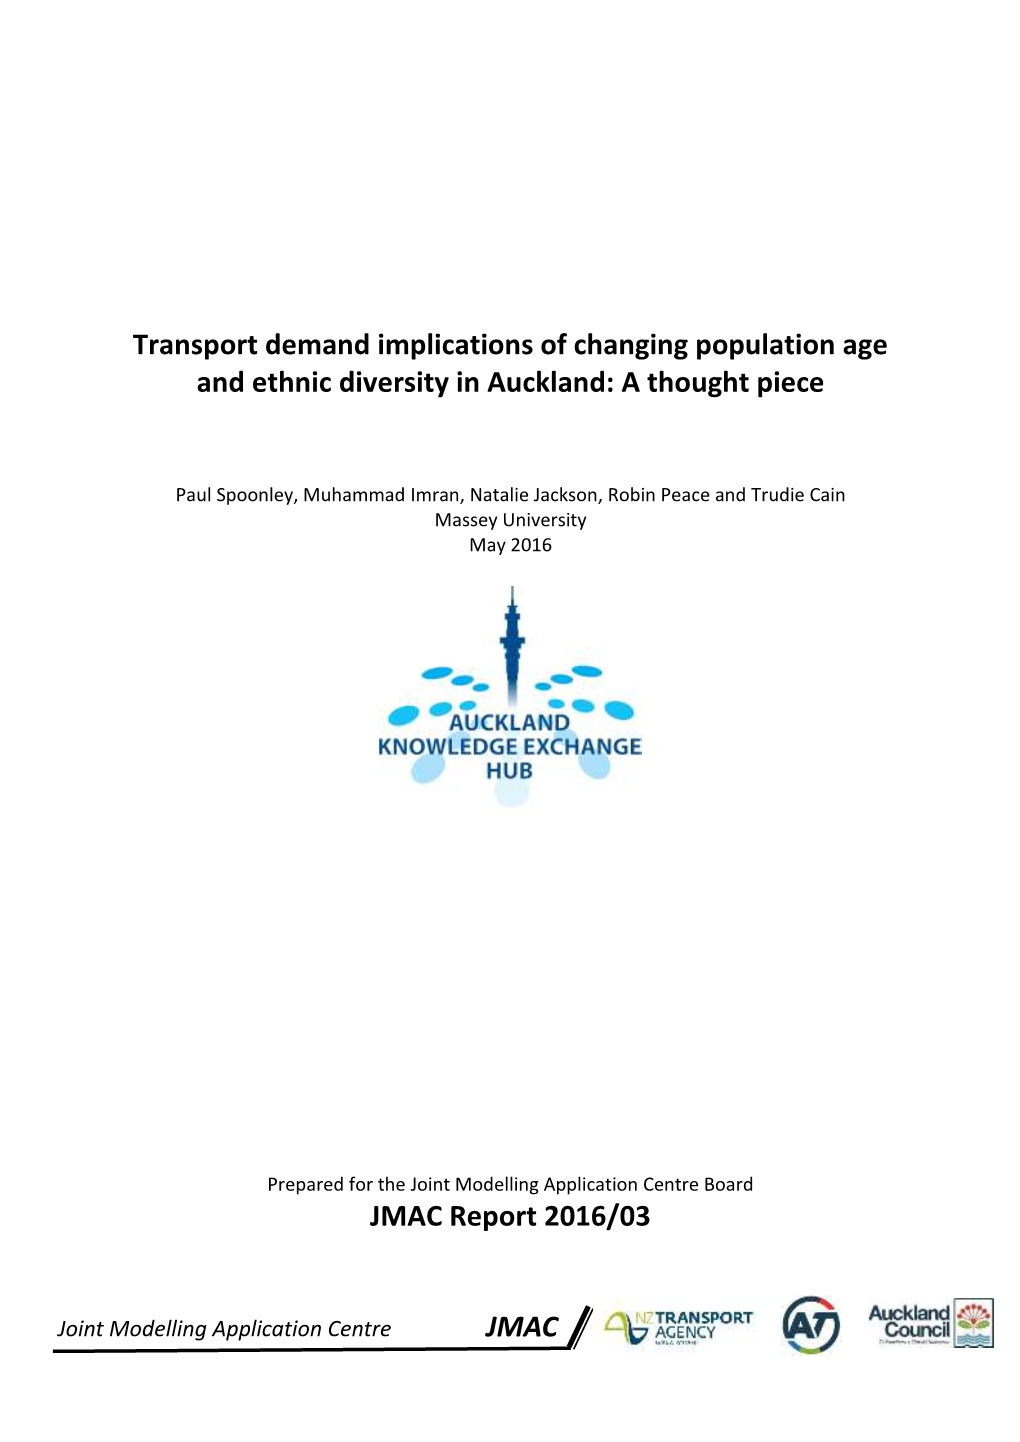 Transport Demand Implications of Changing Population Age and Ethnic Diversity in Auckland: a Thought Piece